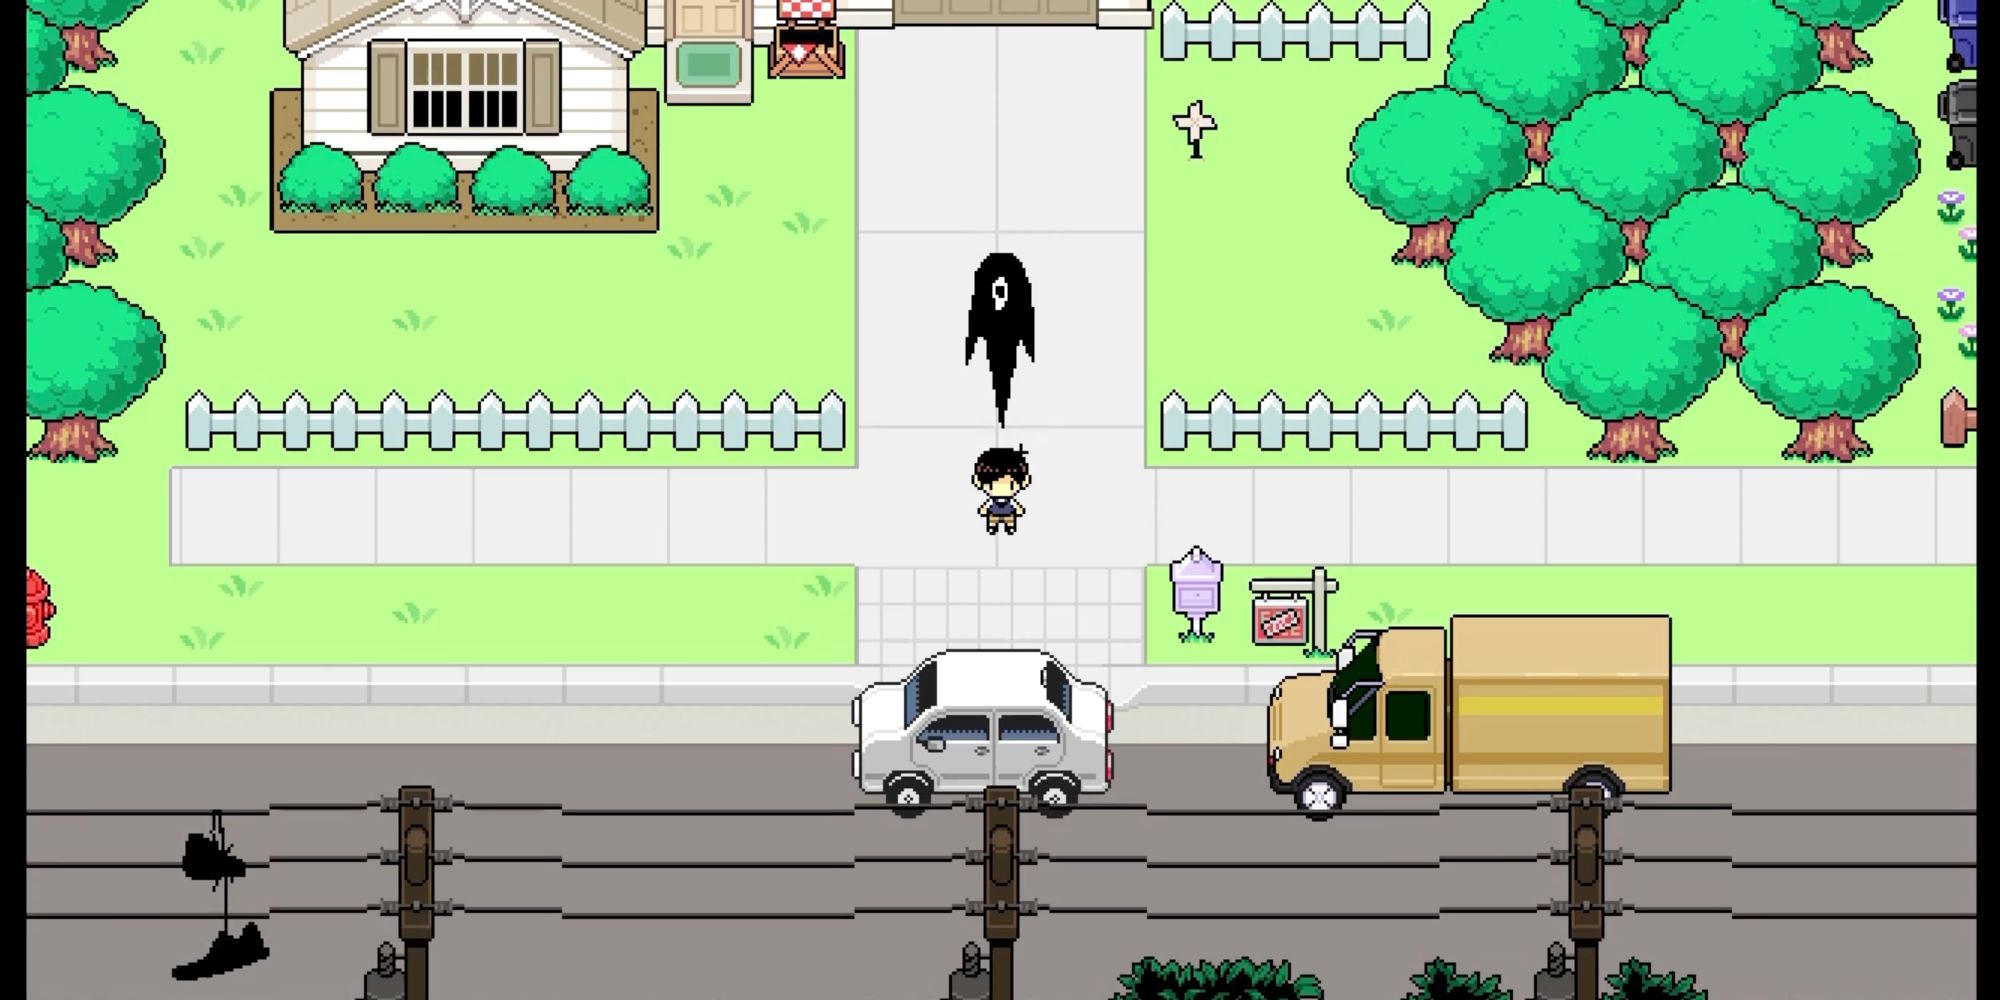 A screenshot from the Abandon Ending of Omori, showing Sunny walking to his mom's car trailed by the Something ghost that's been haunting him